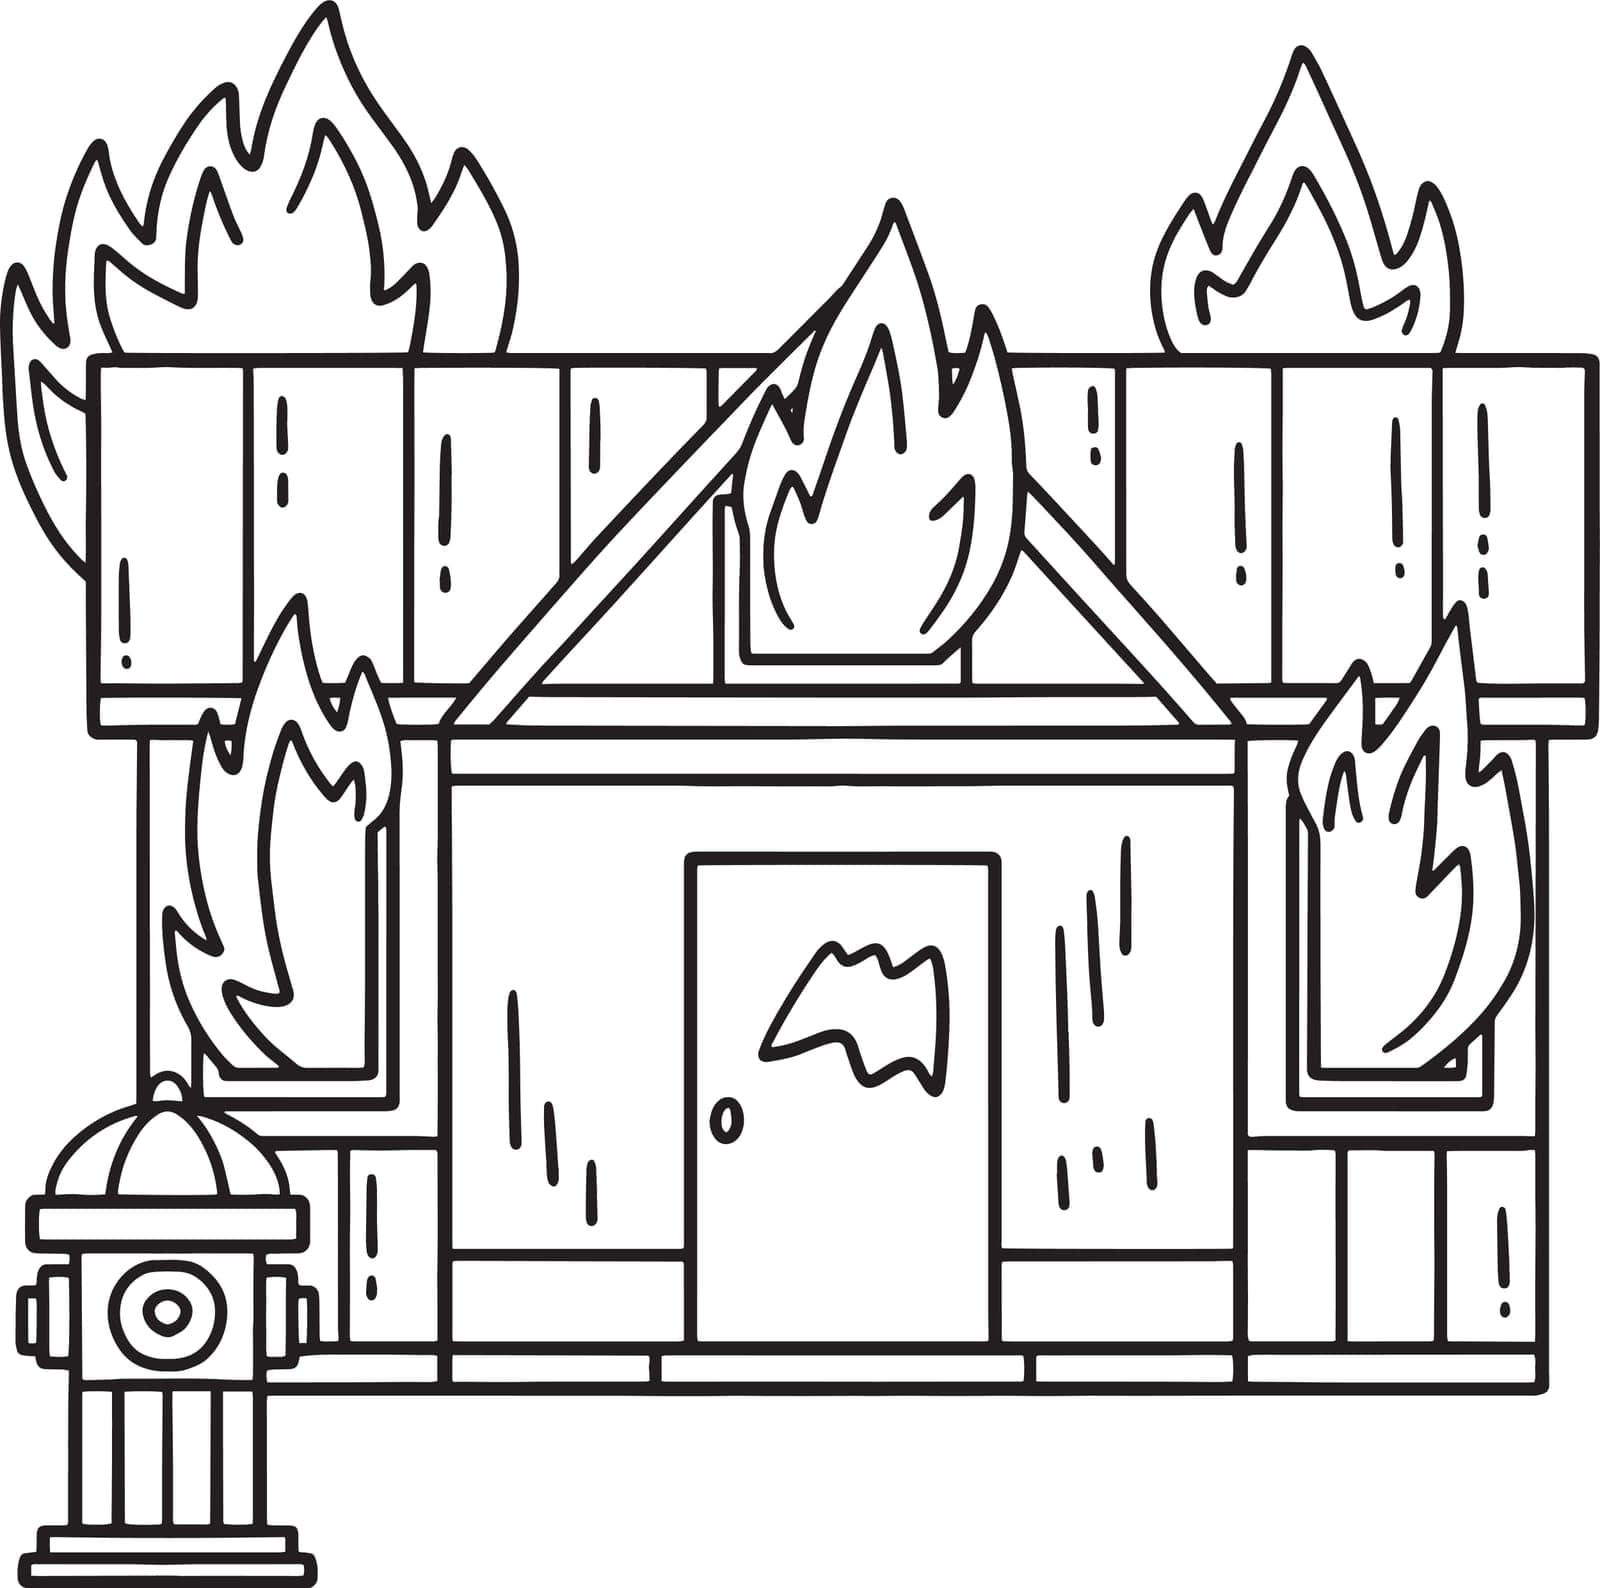 Burning House Isolated Coloring Page for Kids by abbydesign